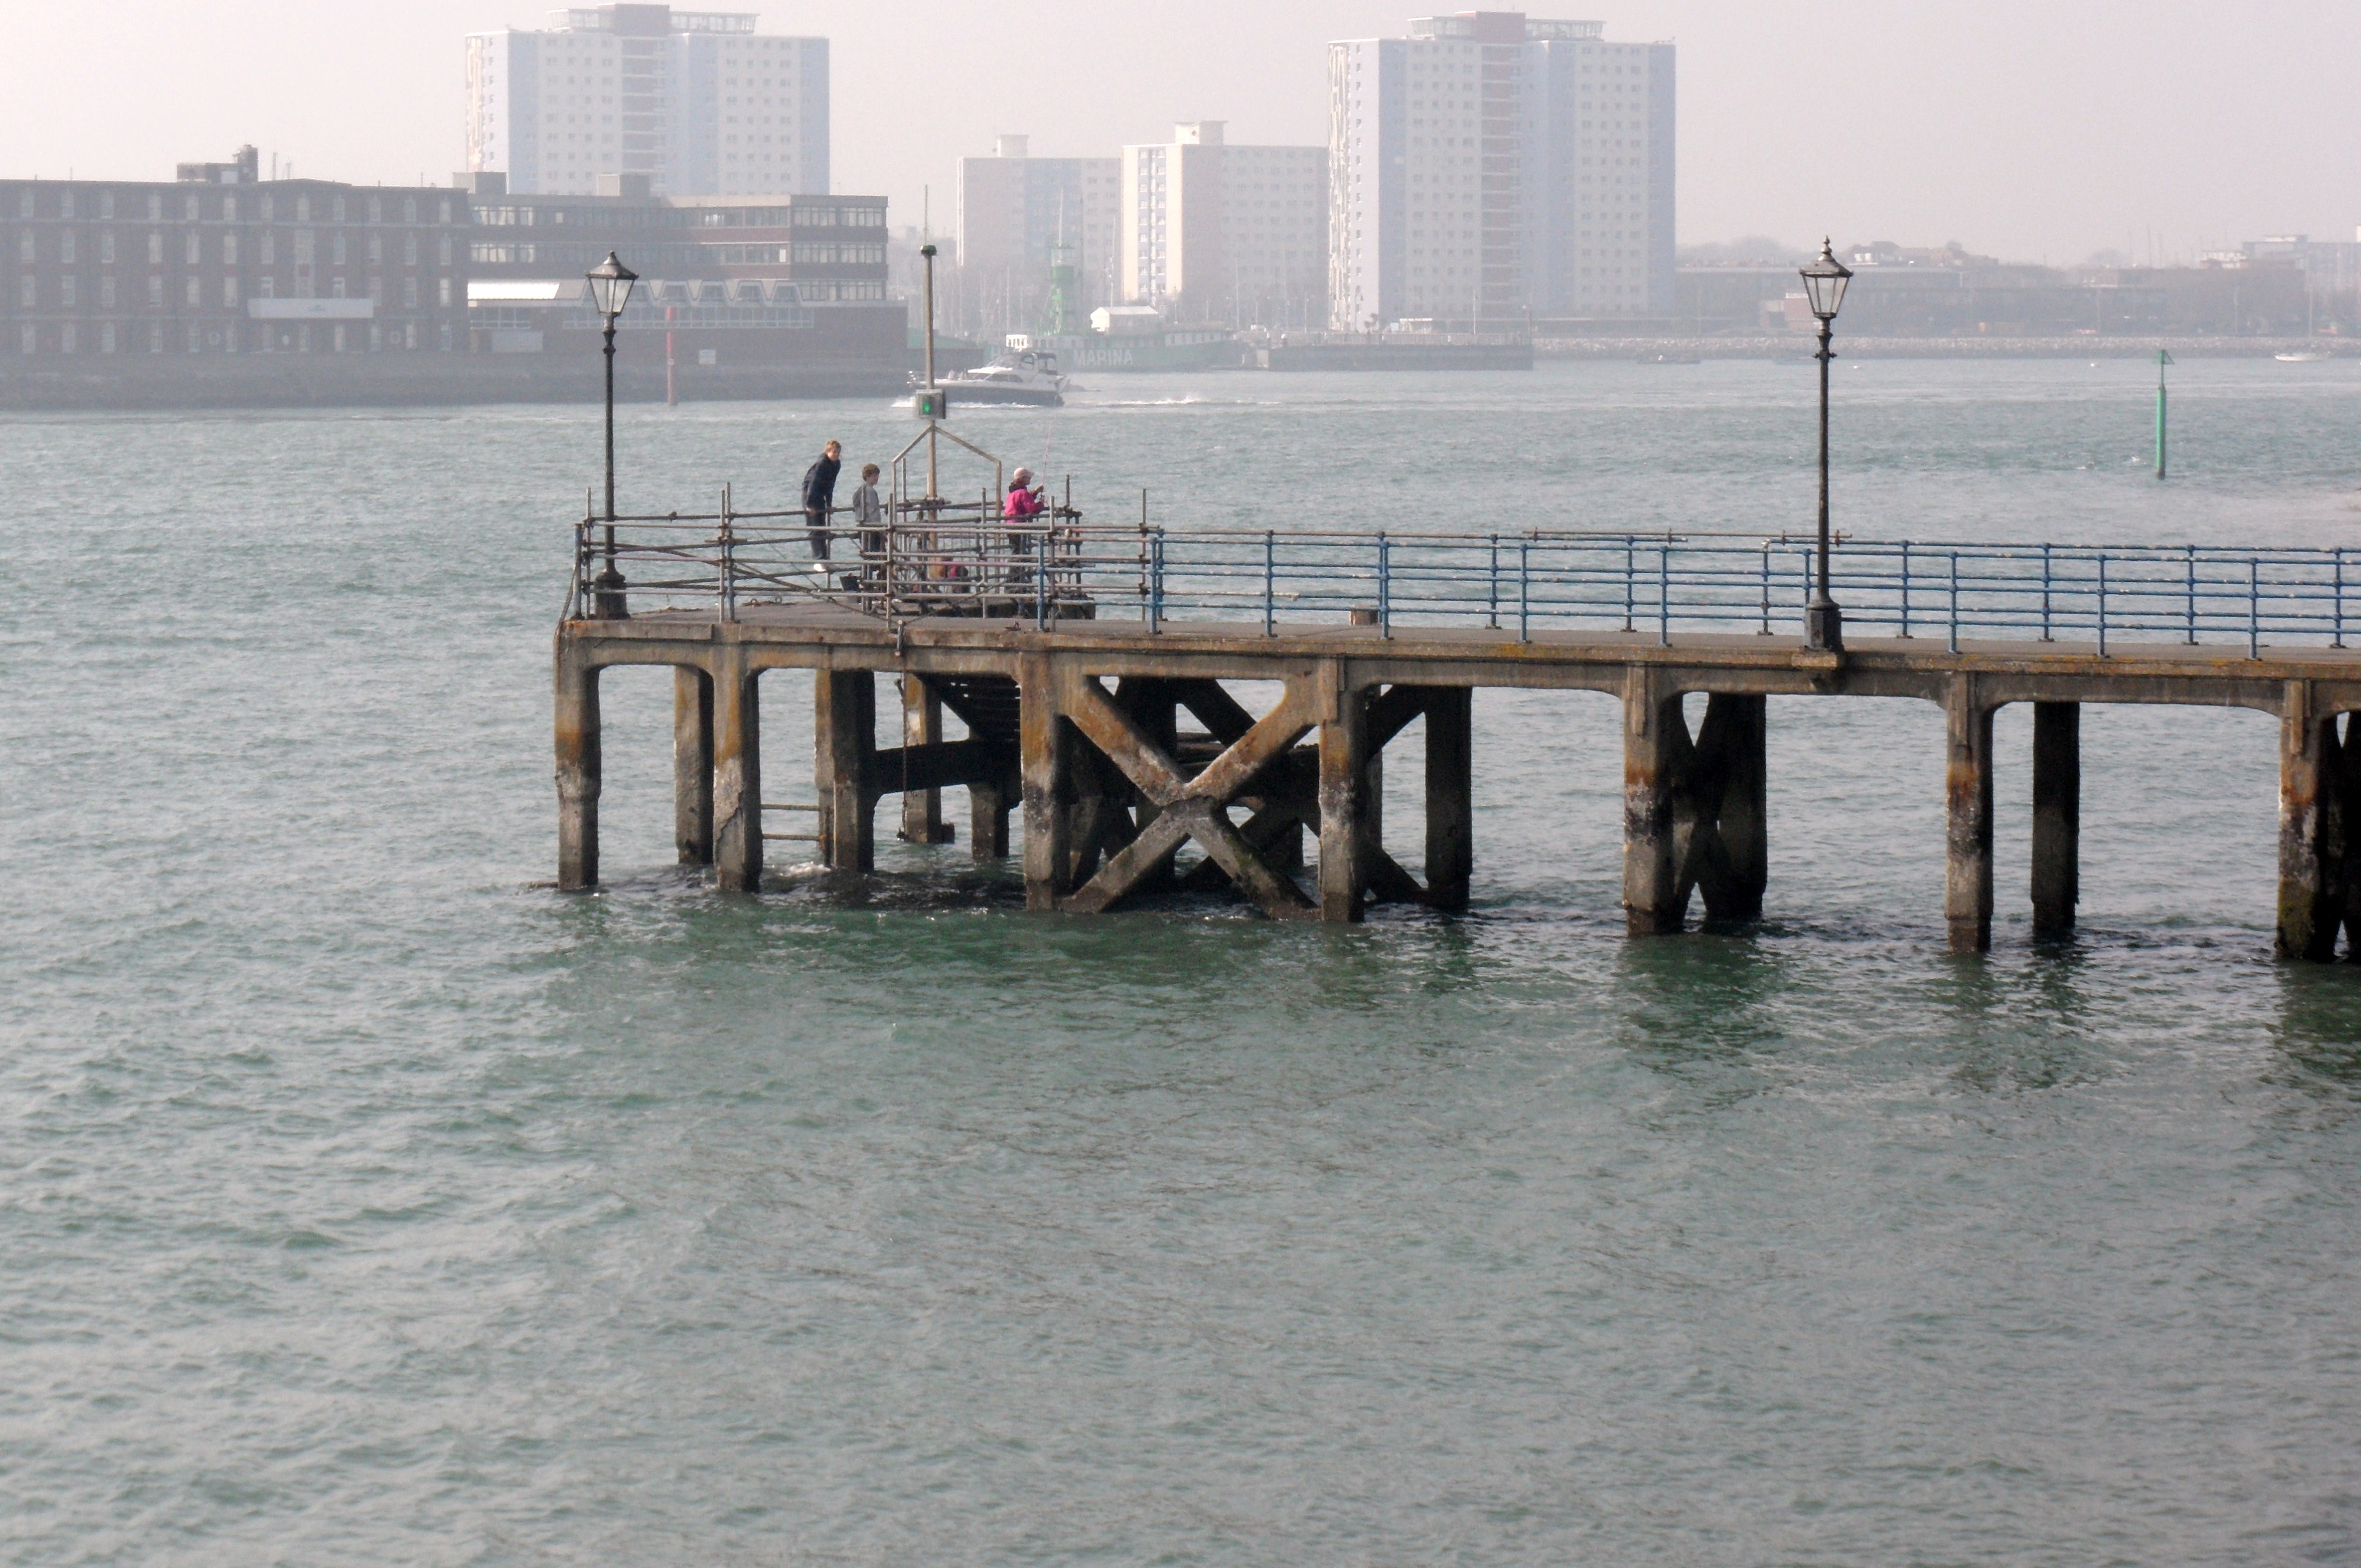 Pier at portsmouth photo